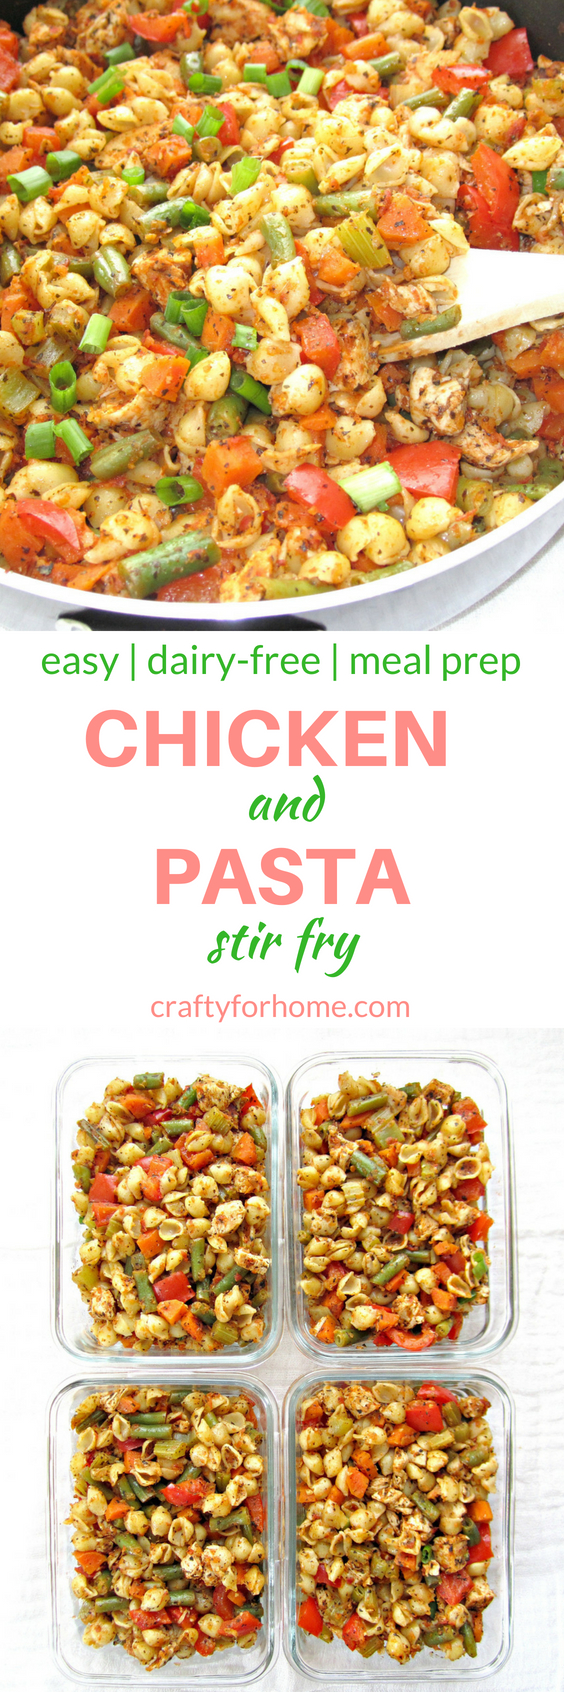 One comfort food of quick and easy healthy Chicken Pasta Skillet recipes for family weeknight dinner meals or meal prep ideas, also use homemade seasonings #mealprep #pasta #skillet #chickenpasta for full recipe on craftyforhome.com